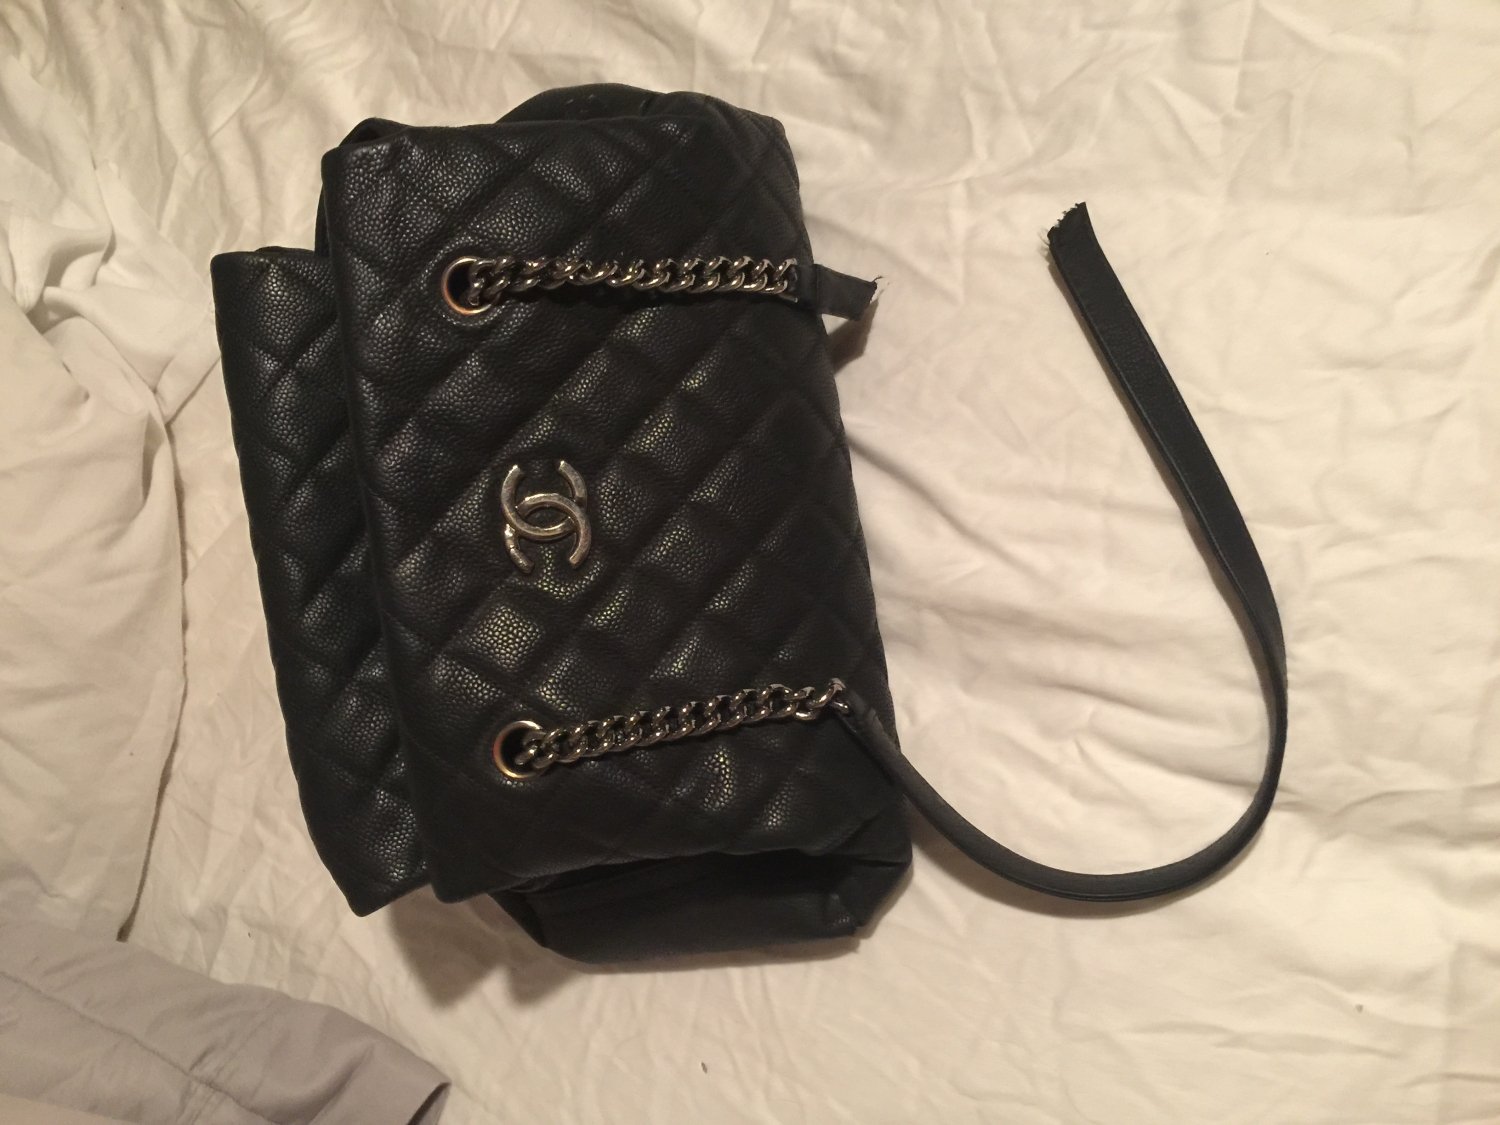 Can A Broken Chanel Bag Be Repaired? | Bragmybag